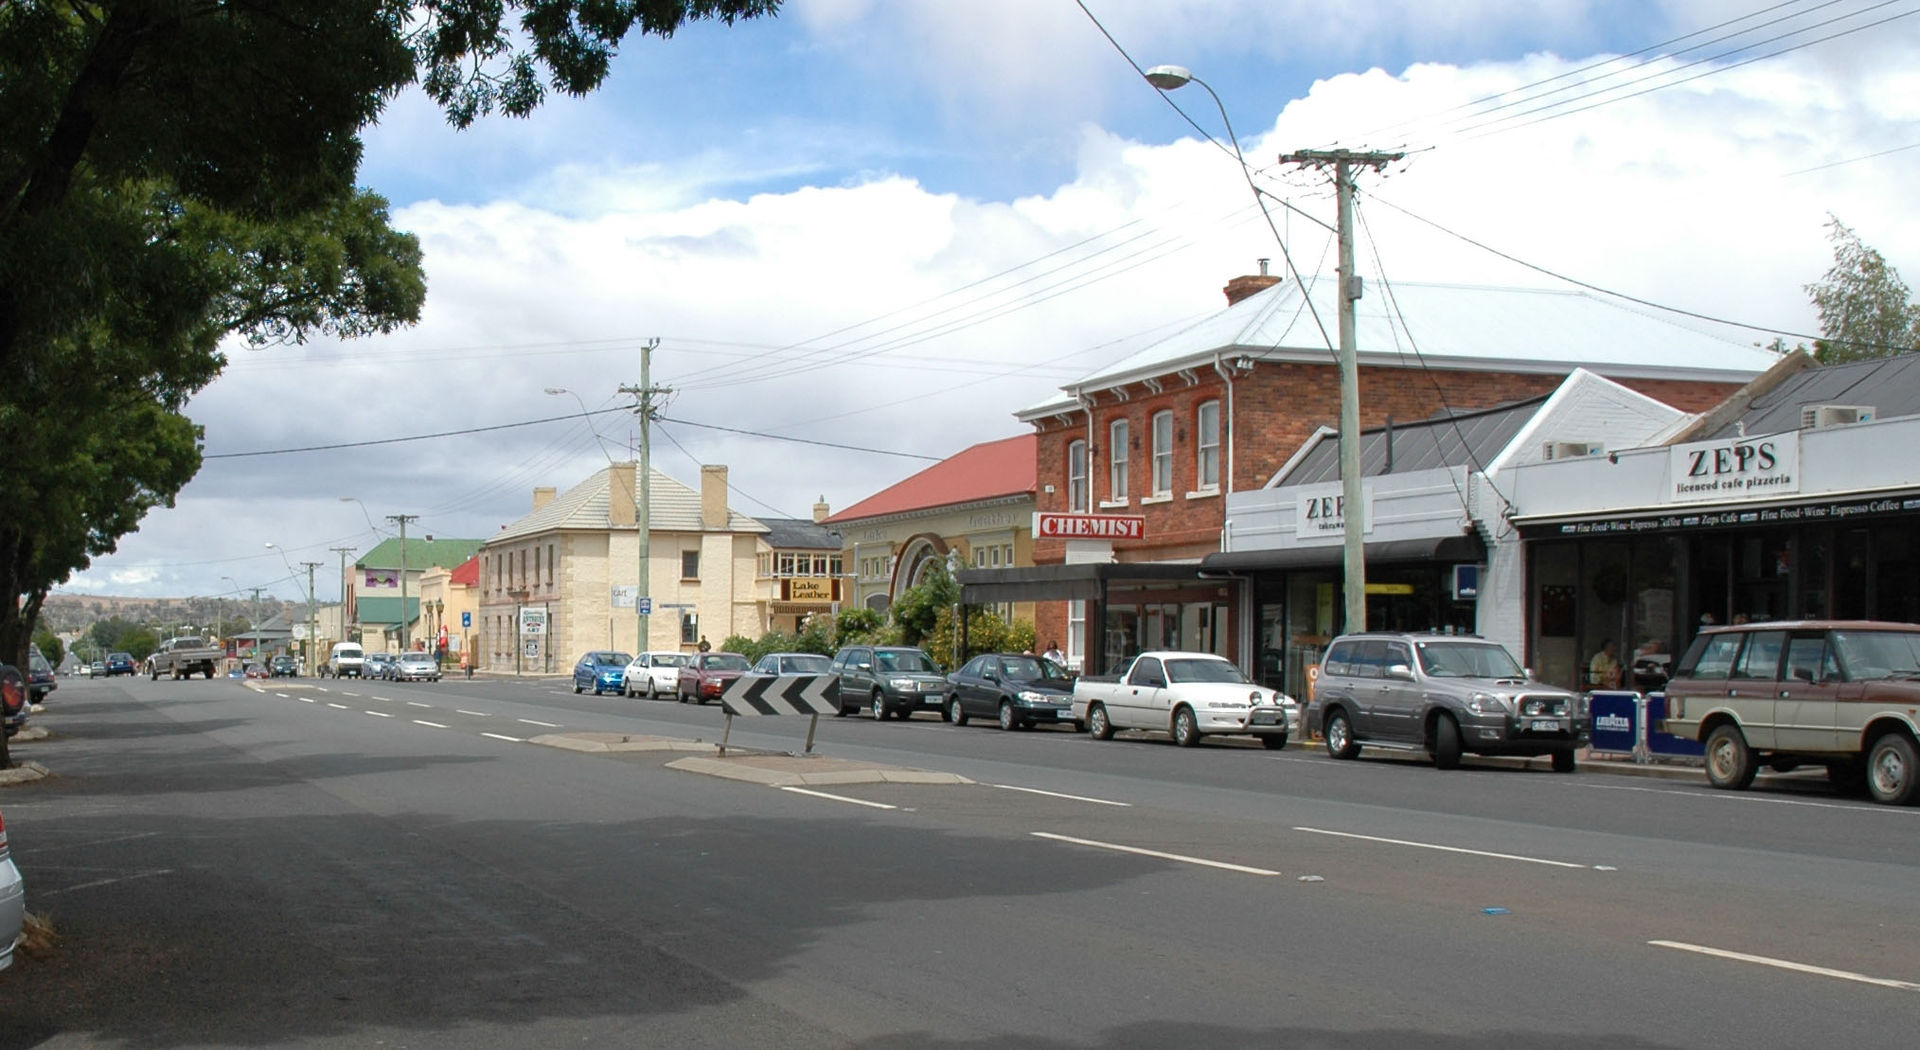 Campbell Town